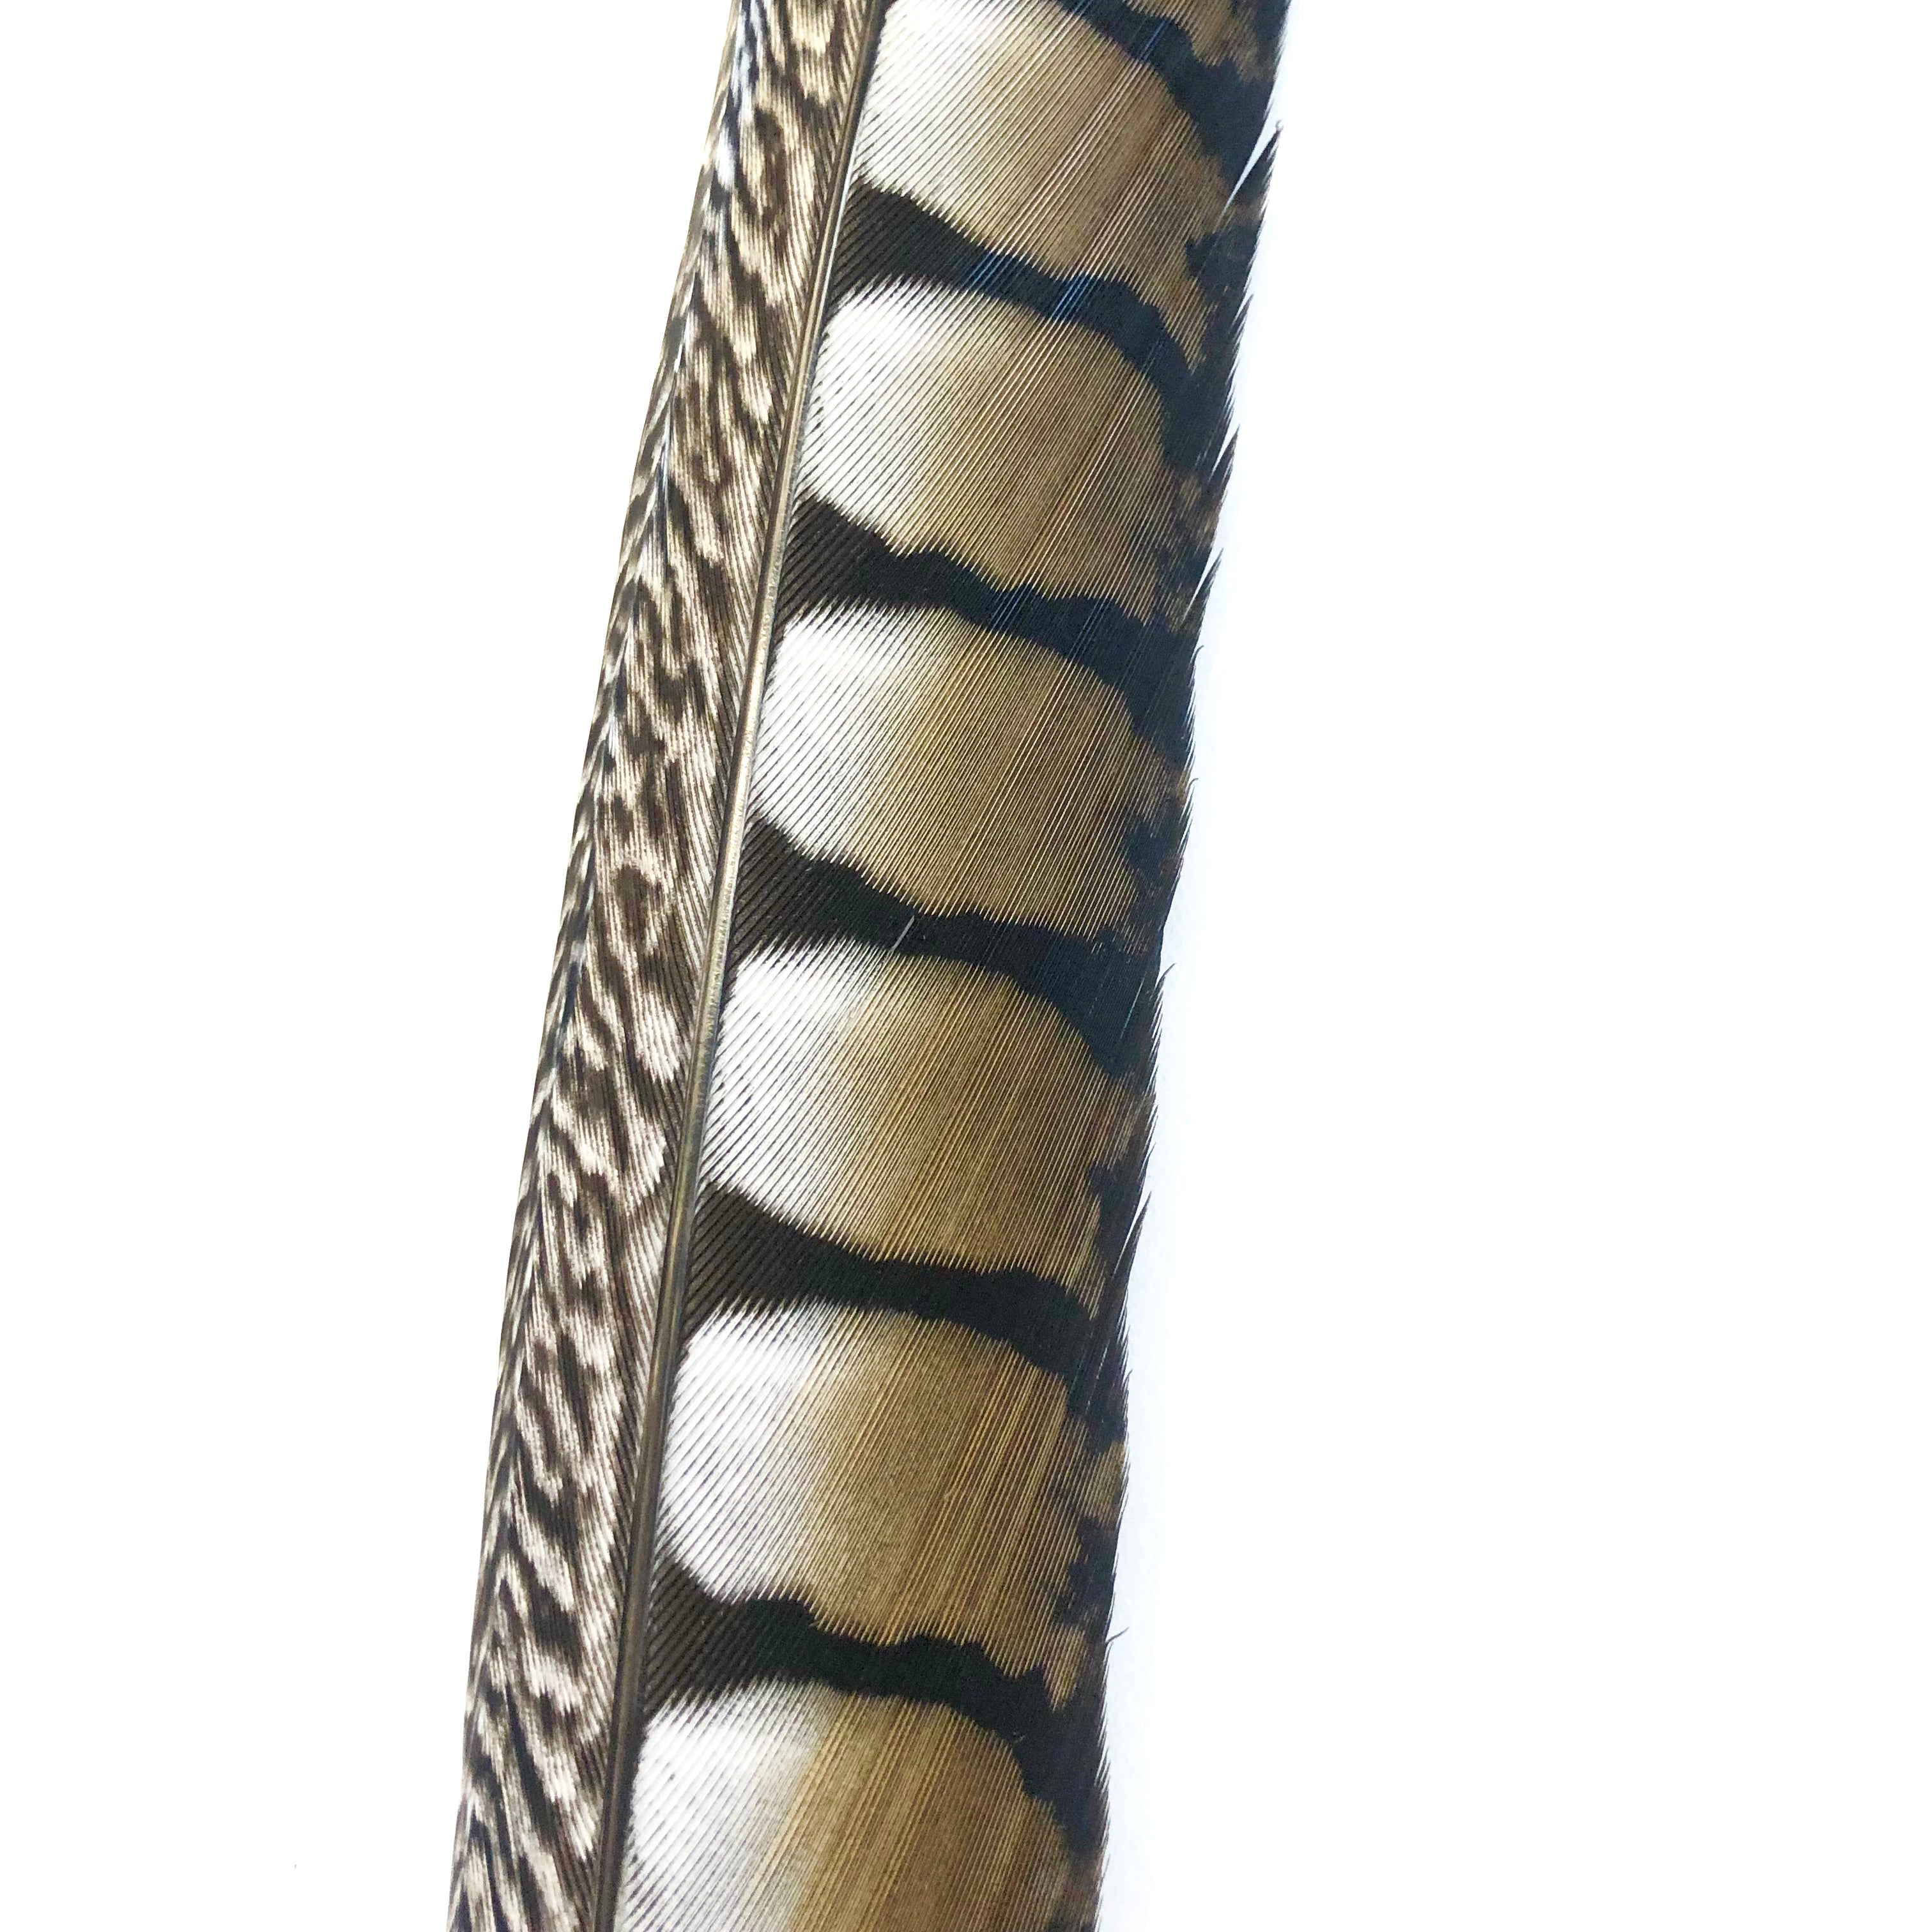 30" to 38" Lady Amherst Pheasant Side Tail Feather - Natural ((SECONDS))